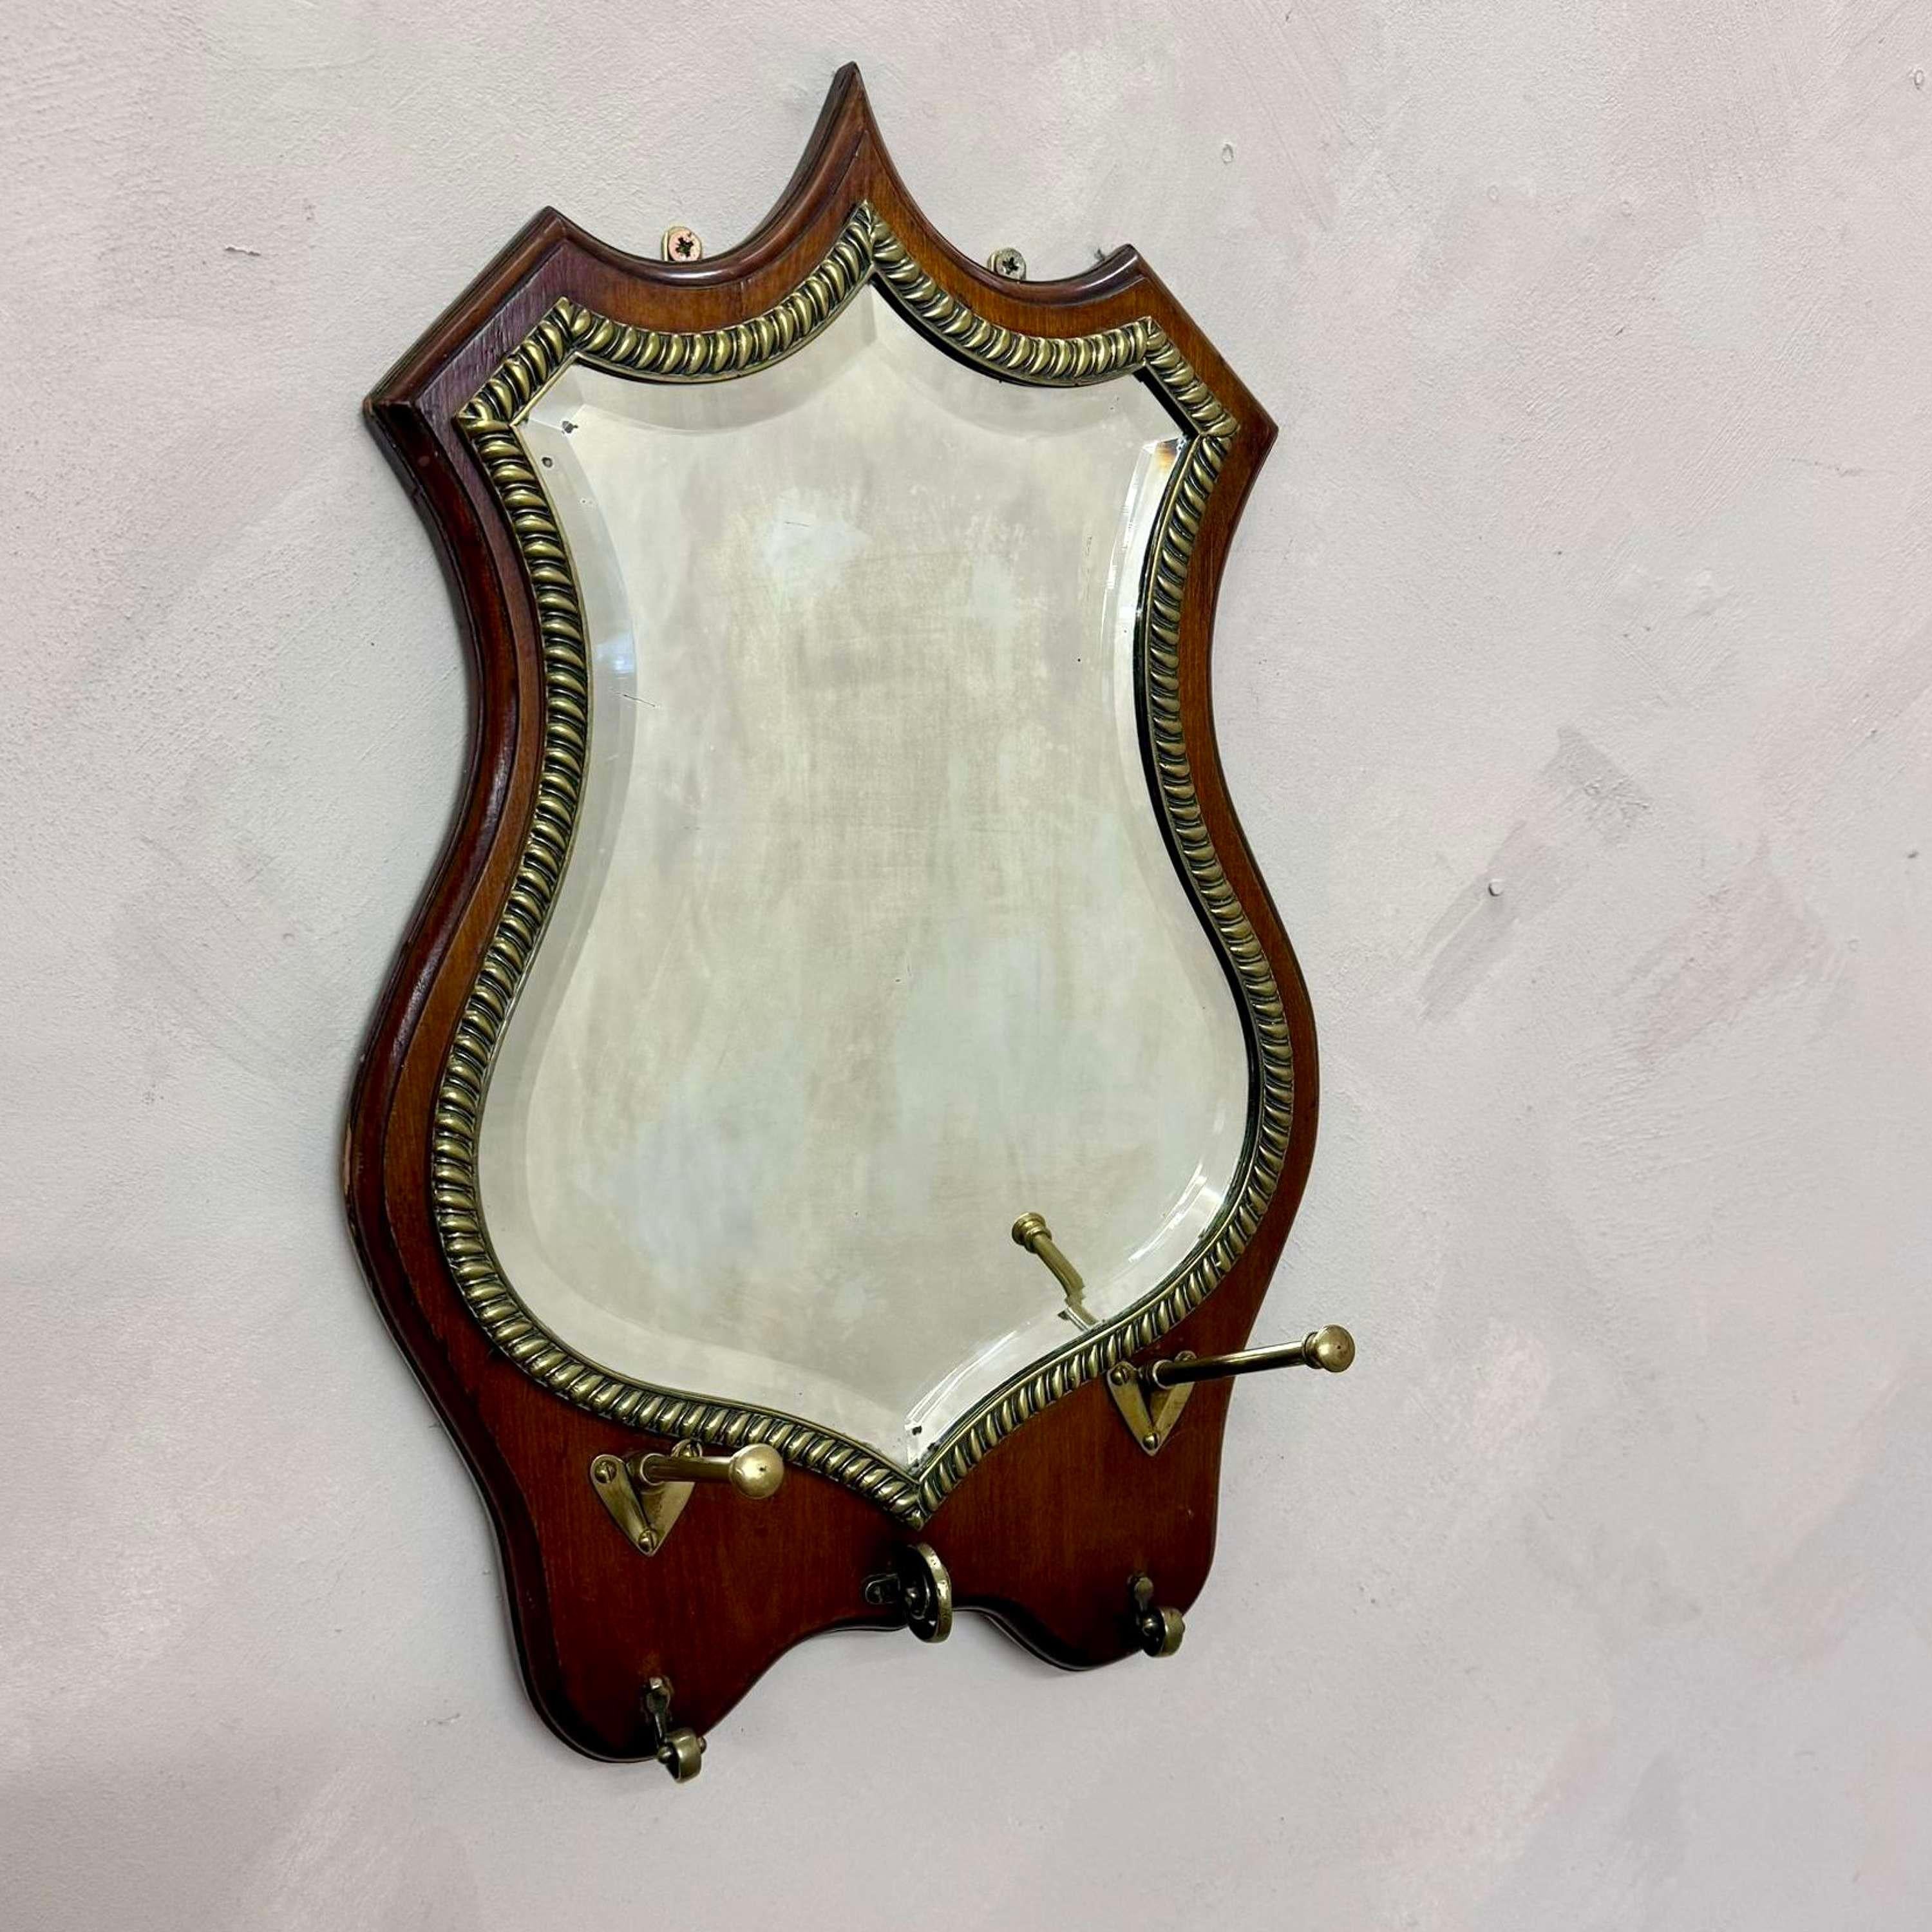 Mahogany framed Shield Mirror, with original bevelled plate.
With brass gadrooning detail and hat and key hooks.

England, circa 1890.
Dimensions:W: 34cm (13.4